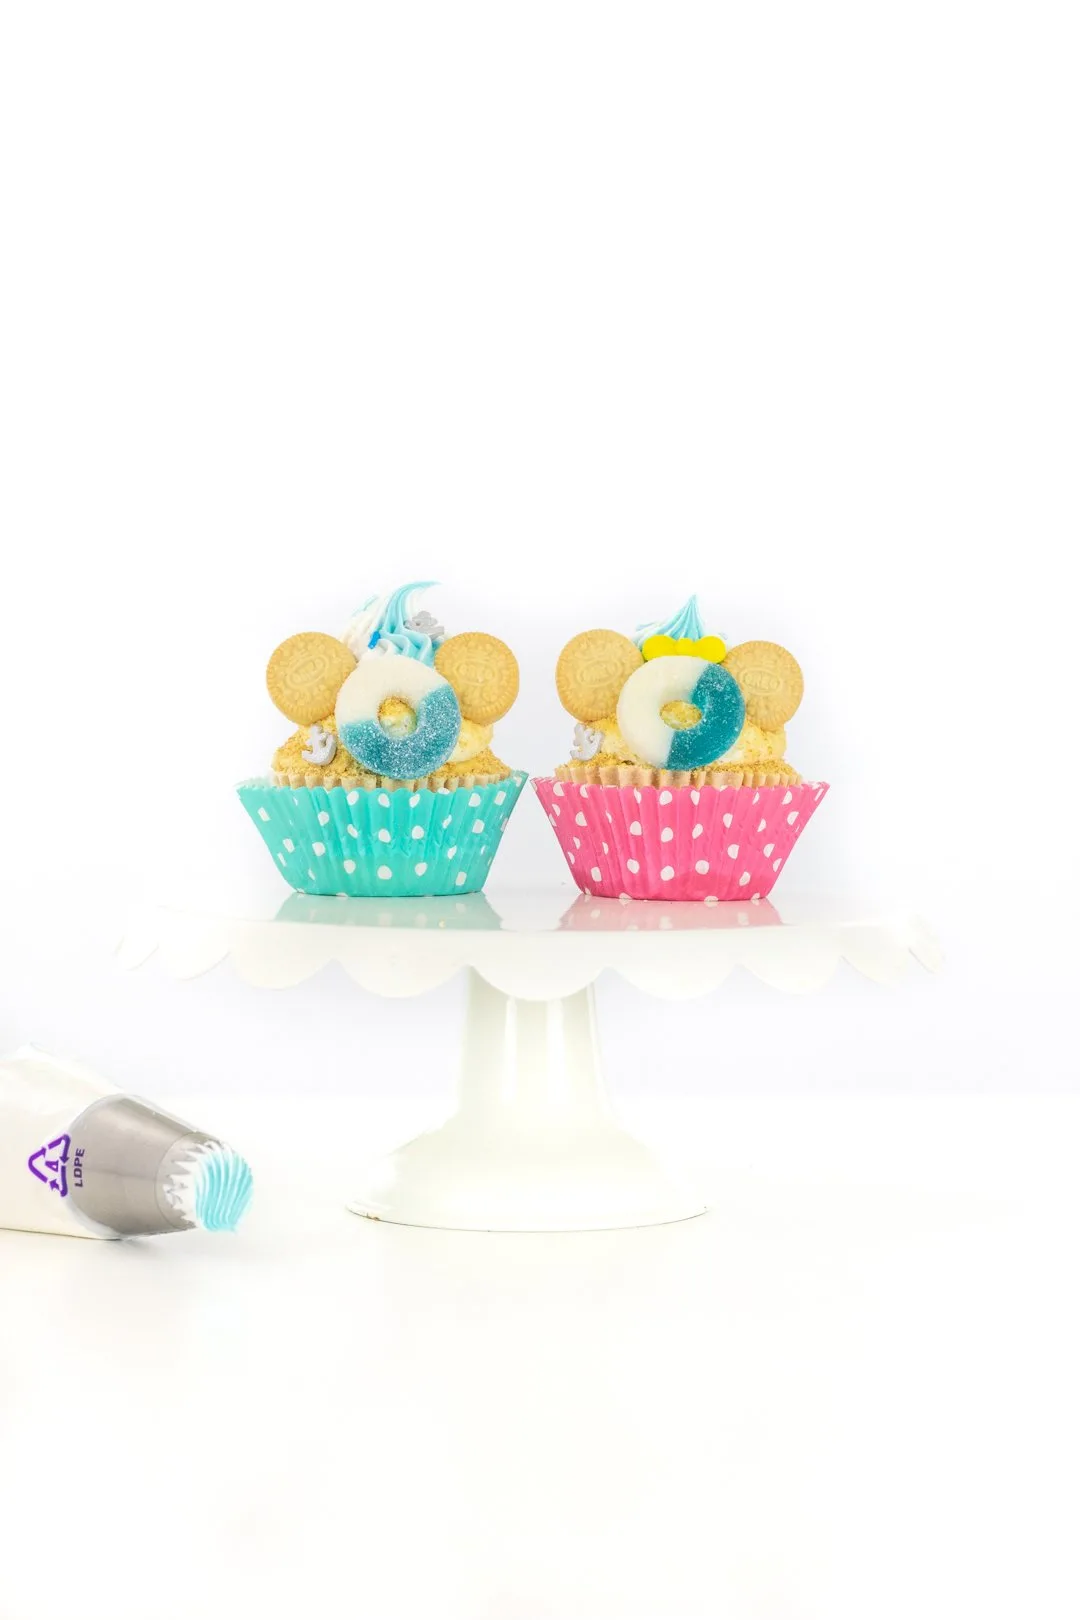 mickey and minnie cruise cupcakes with mini OREO cookies for ears